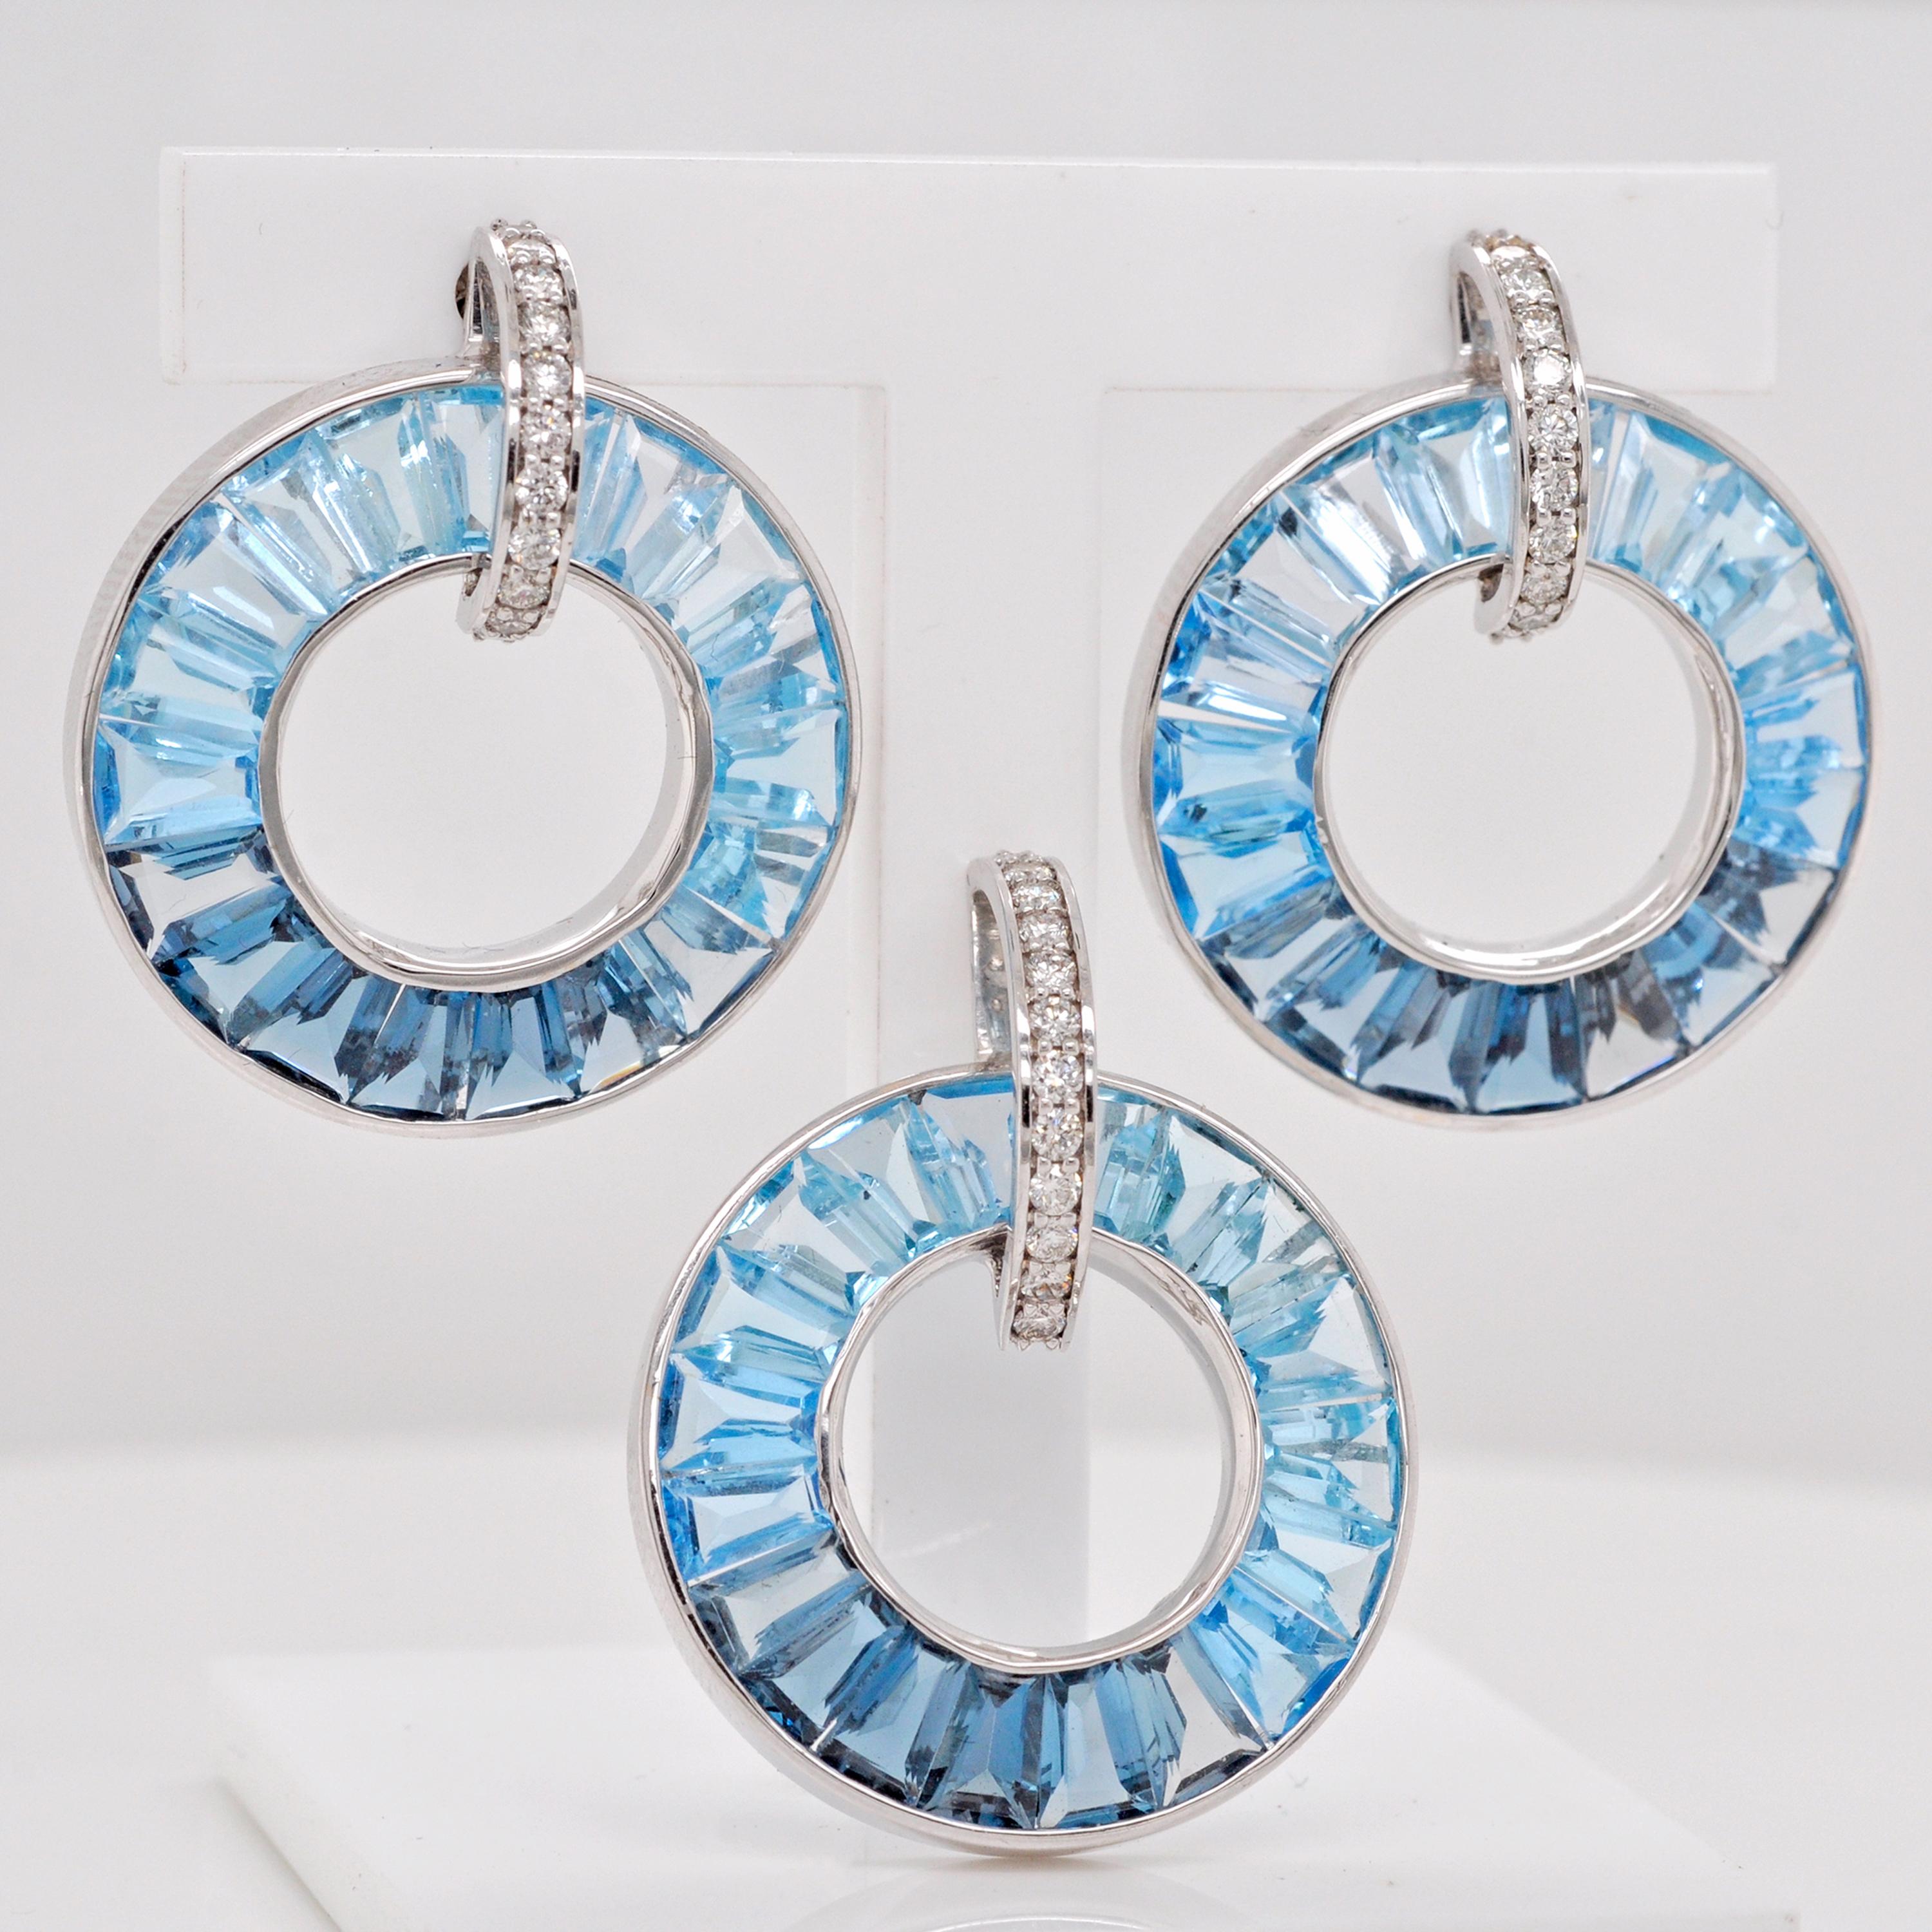 18k white gold baguette-cut blue topaz diamond circle pendant earrings set.

This exquisite 18k white gold blue topaz diamond circle set—a radiant ensemble crafted to elevate your style with its captivating beauty. Meticulously fashioned in